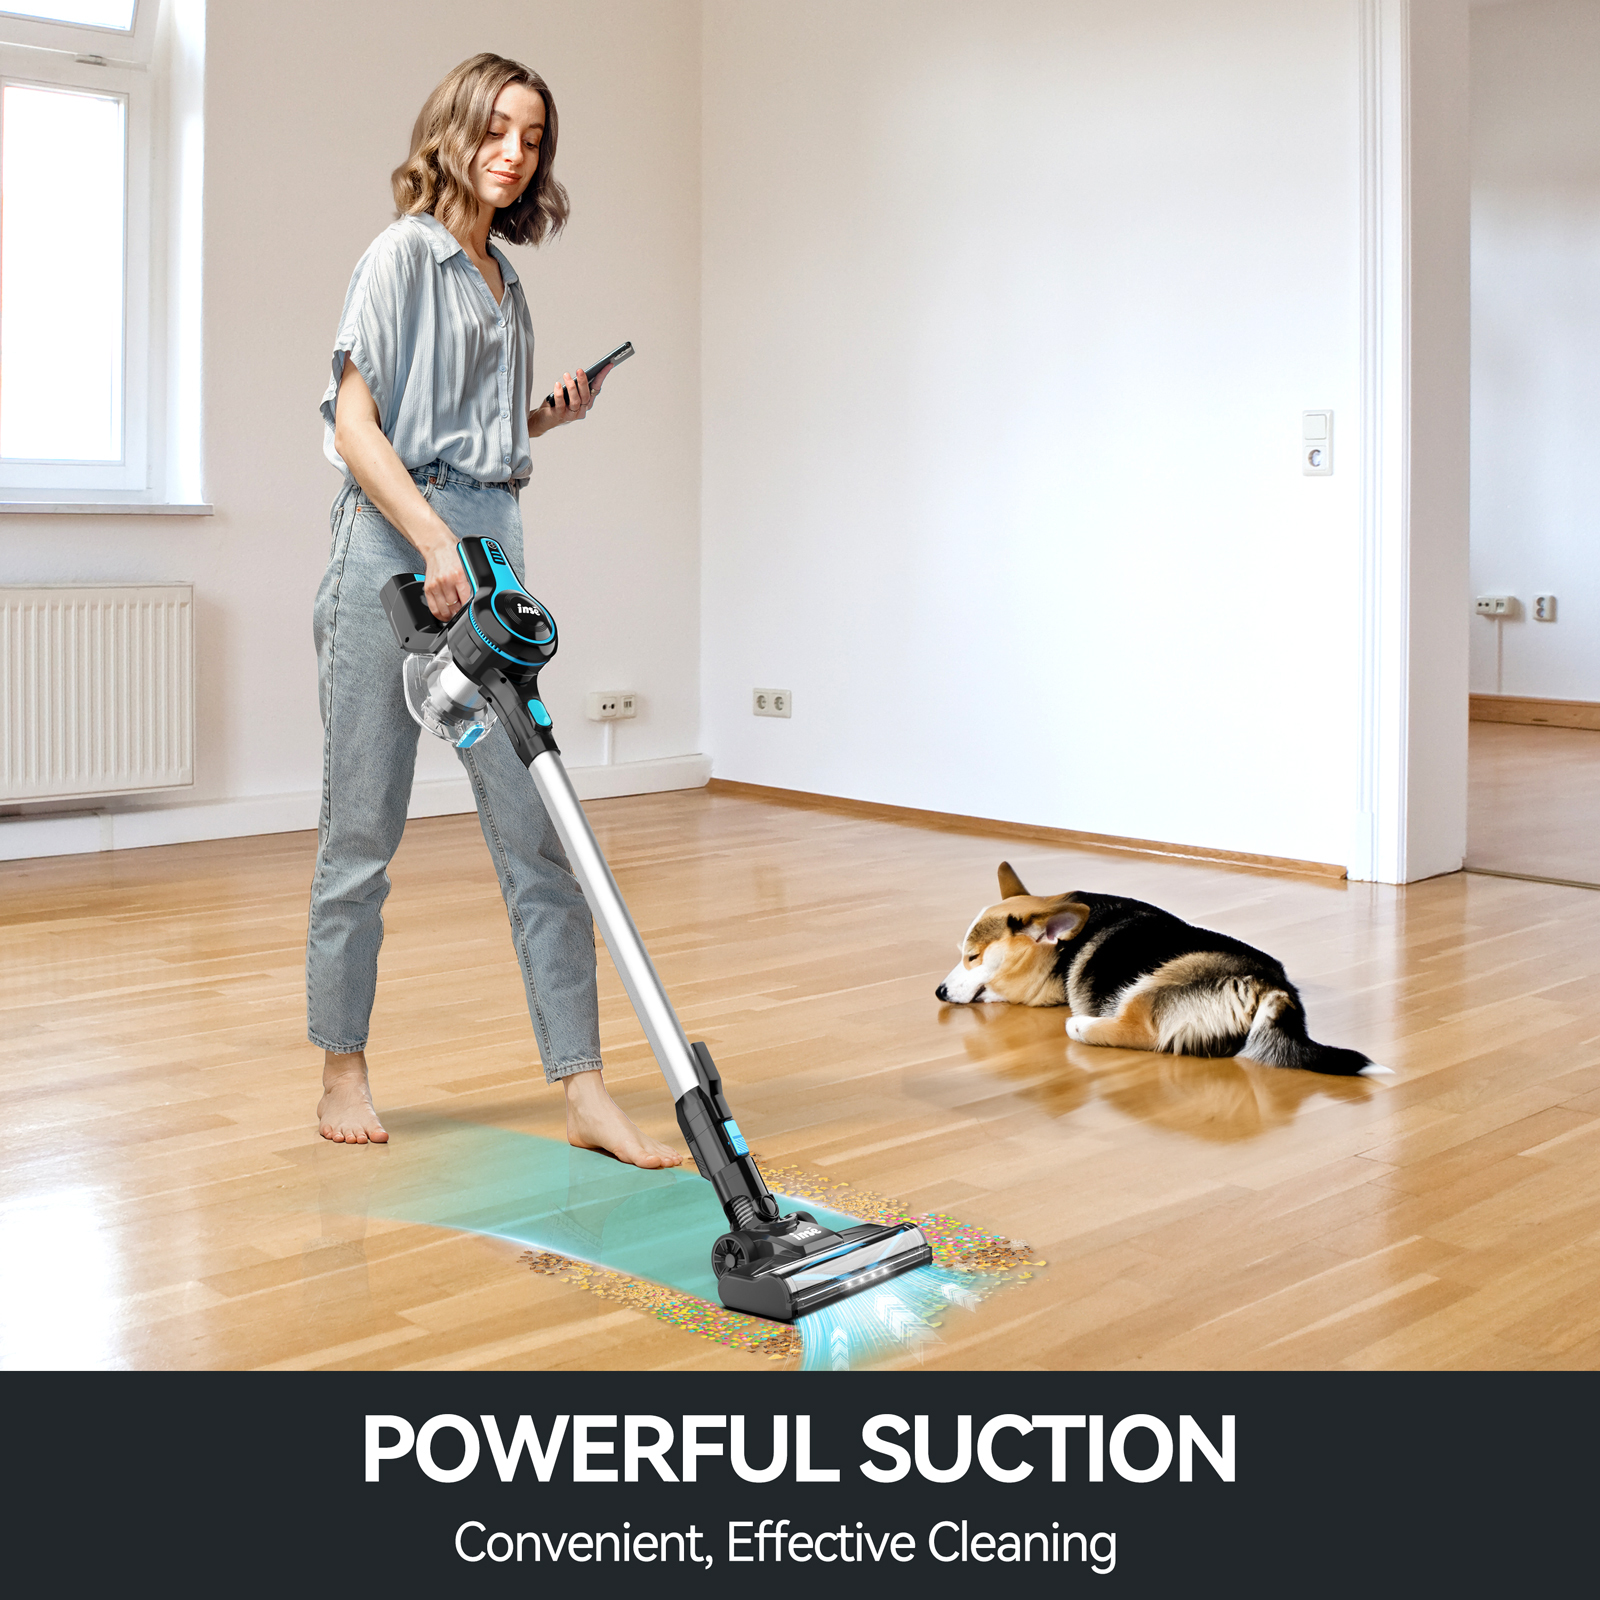 INSE Cordless Vacuum Cleaner, 6 in 1 Powerful Suction Lightweight Stick Vacuum with 2200mAh Rechargeable Battery, up to 45min Runtime, for Home Furniture Hard Floor Carpet Car Hair - image 5 of 12